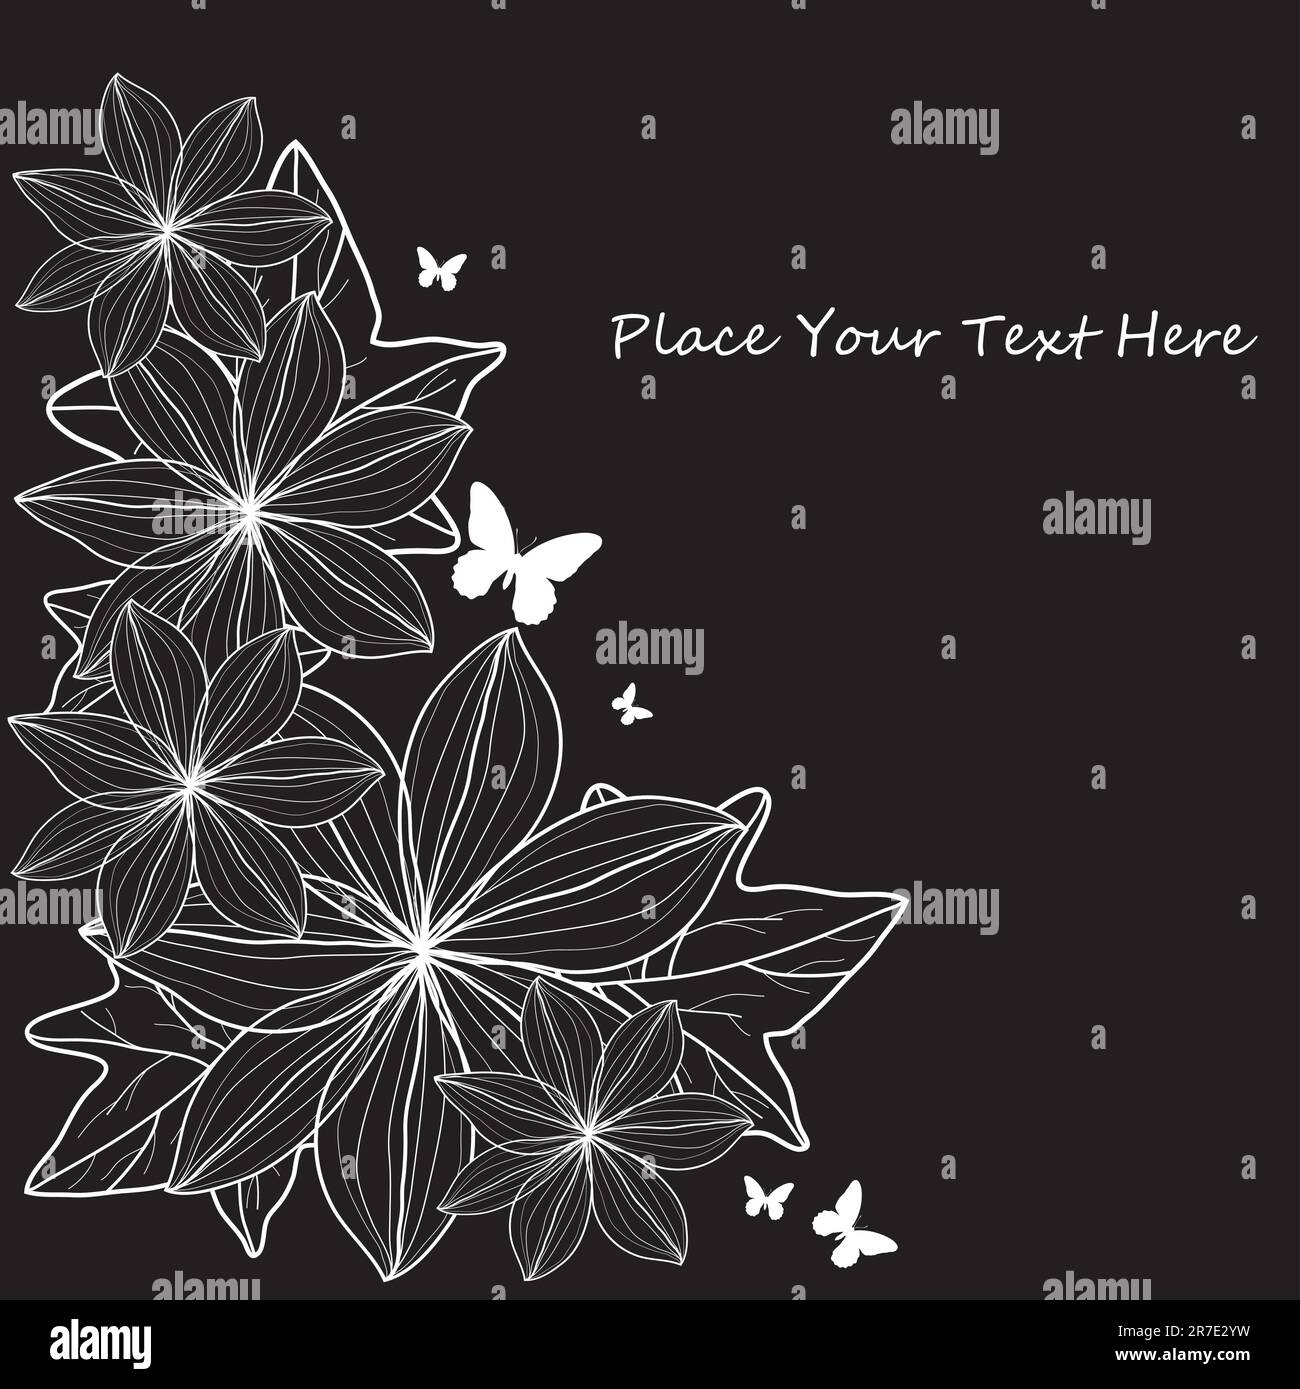 frame for text with floral ornament and grunge elements Stock Vector